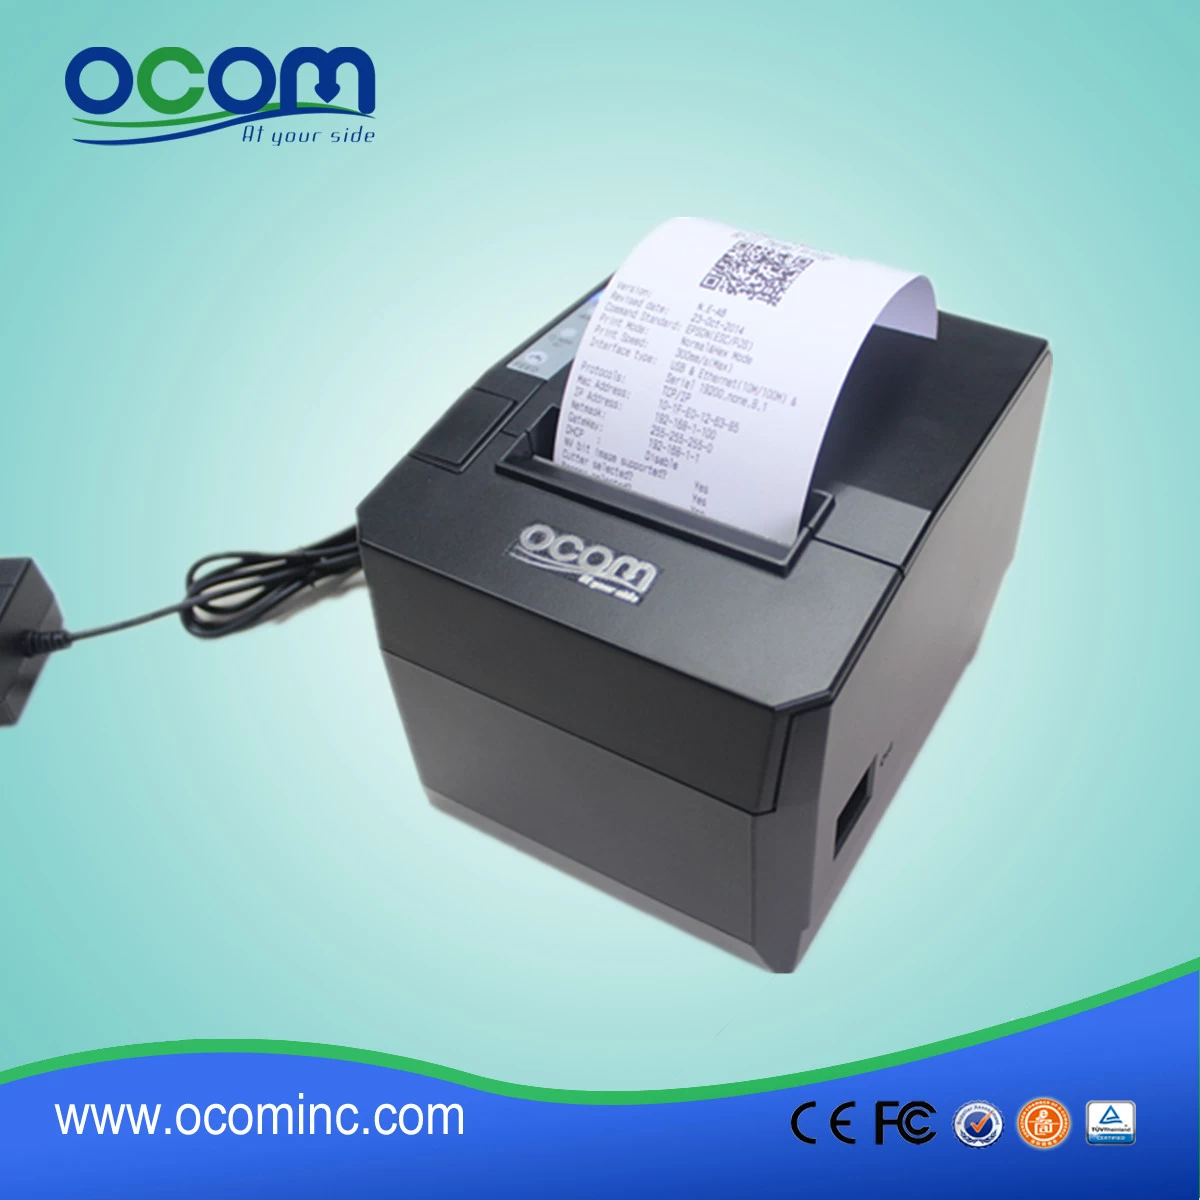 China made low cost wifi or bletooth POS receipt printer-OCPP-88A